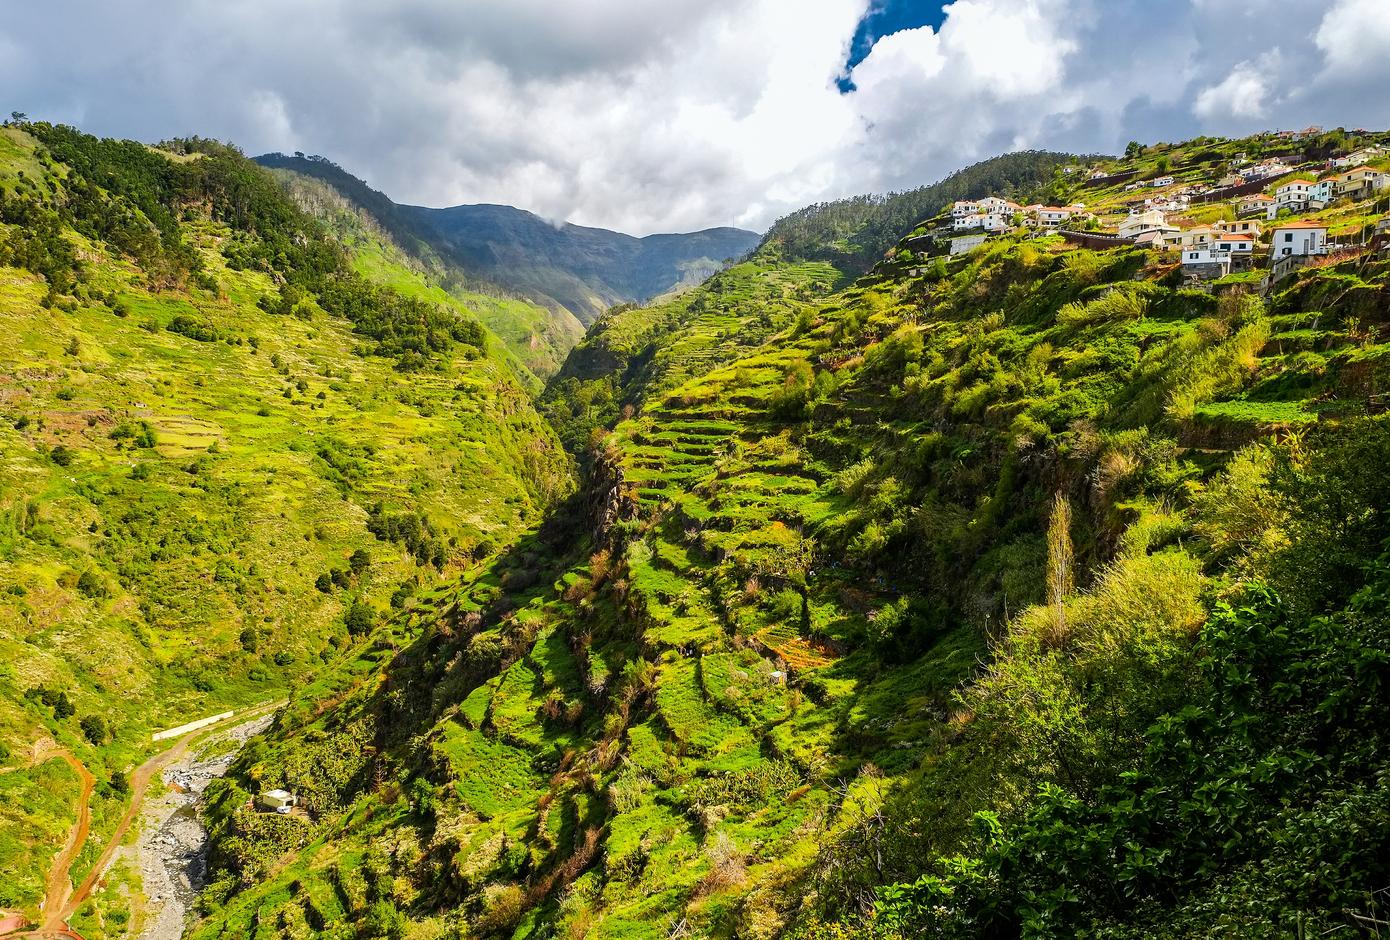 View of the island of Madeira Island's eternal spring, laurel forests and levades.
